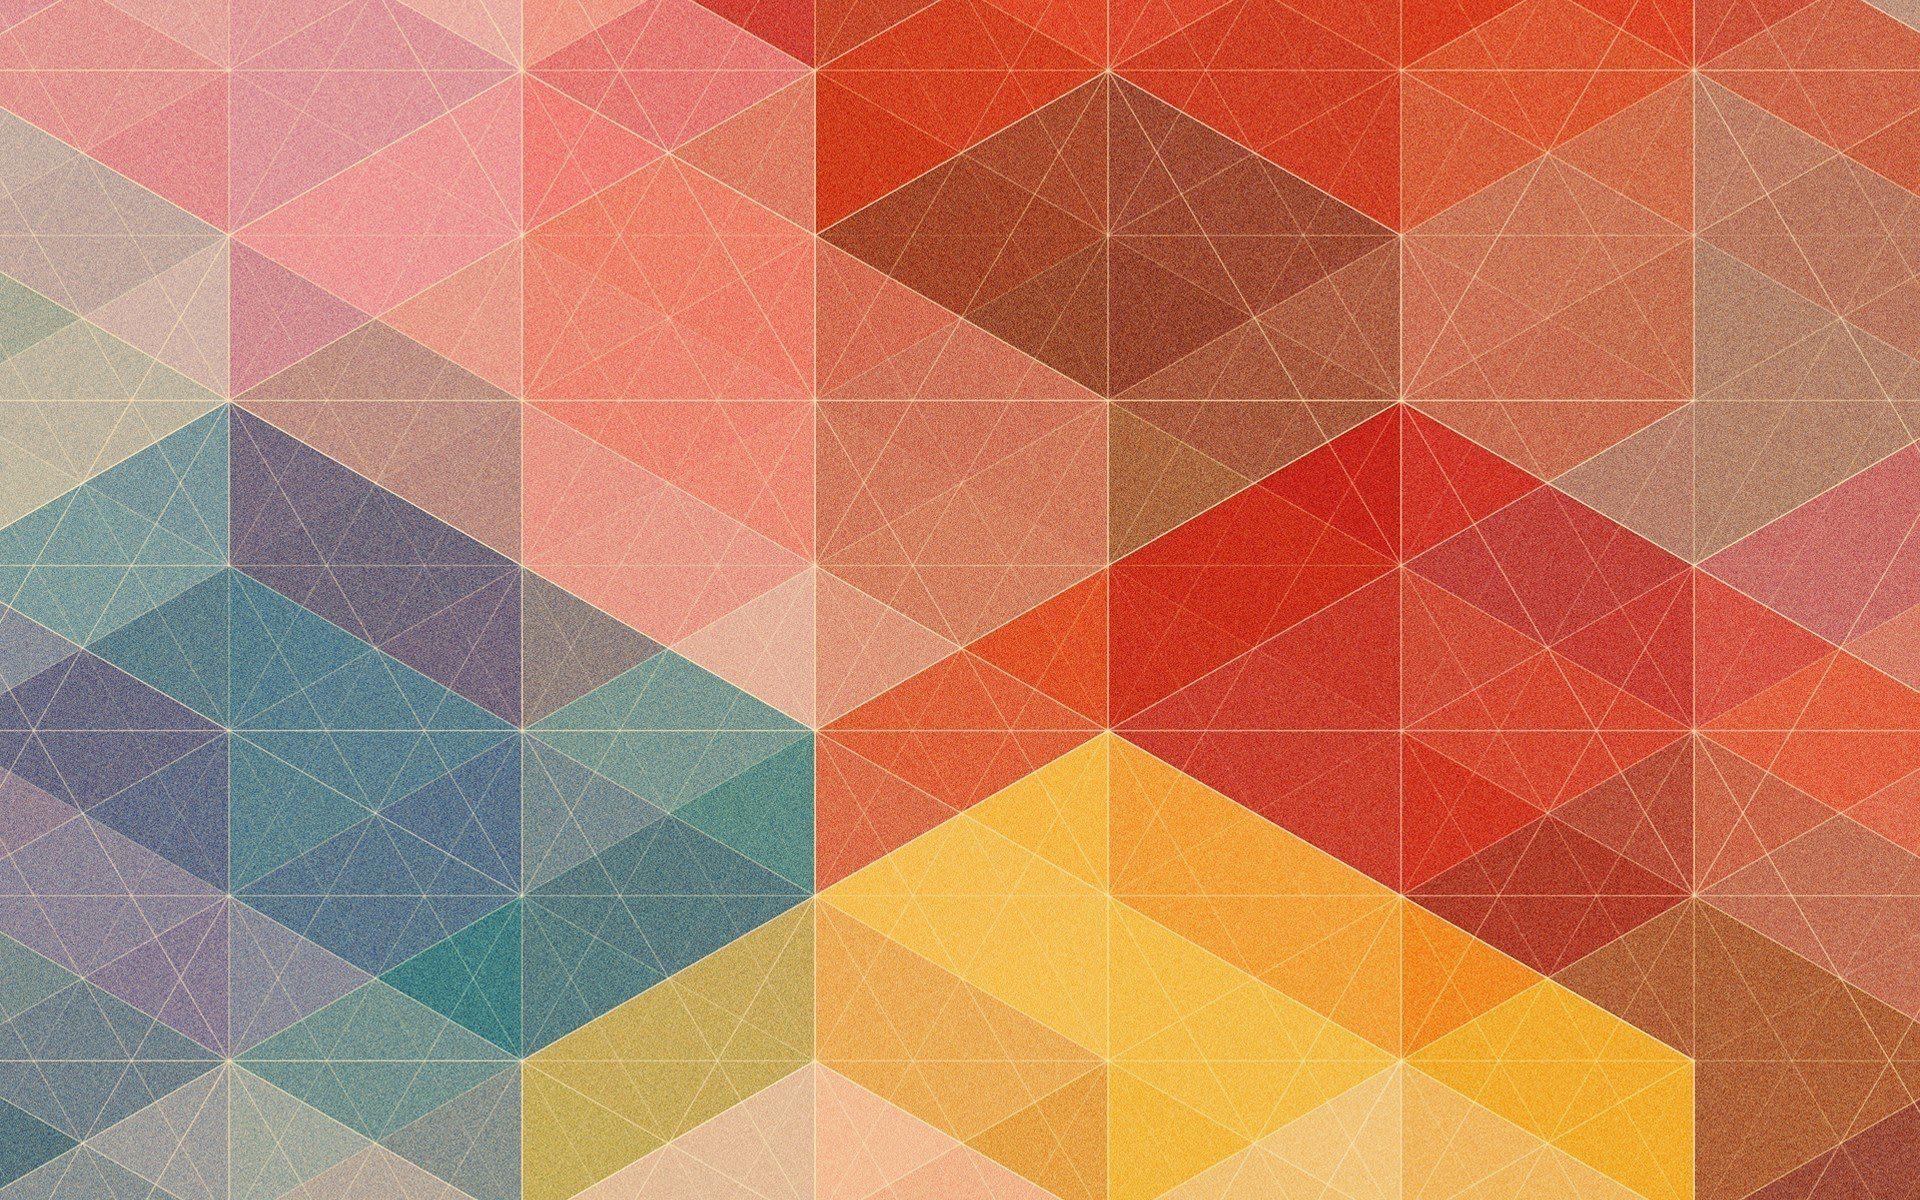 rich and colorful geometric wallpaper for your mobile devices